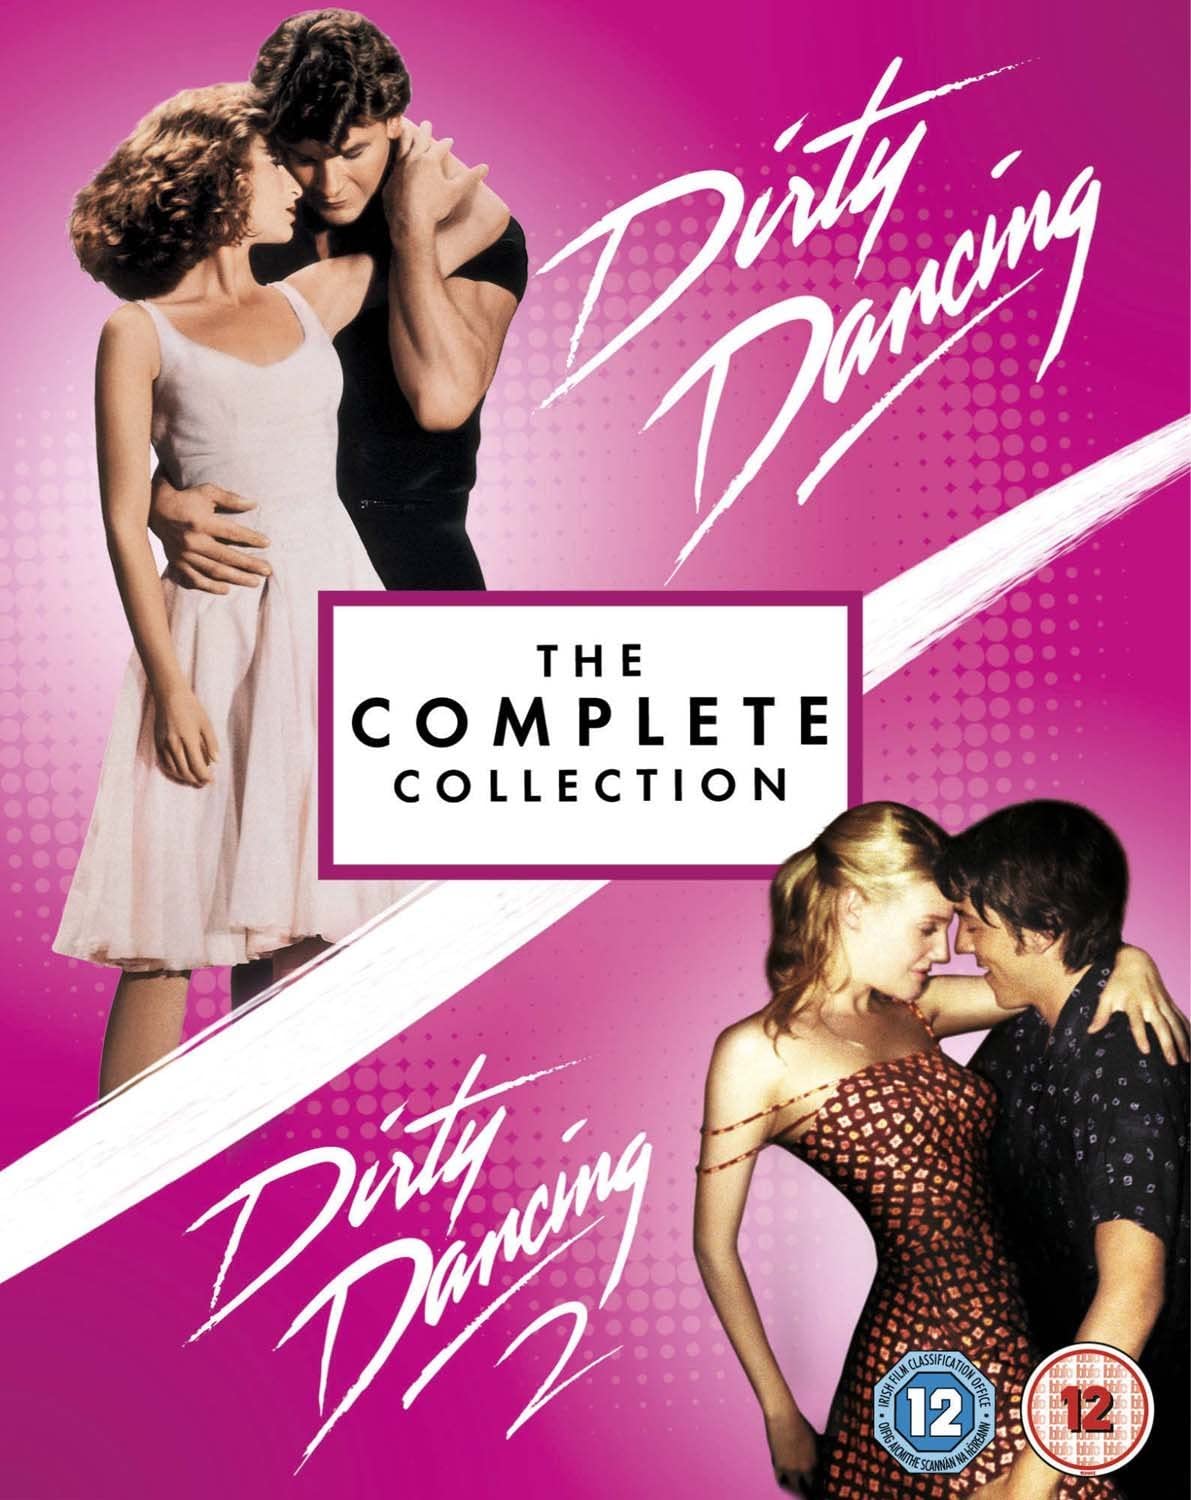 Dirty Dancing - The Complete Collection - Blu Ray Disc | Emile Ardolino, Guy Ferland